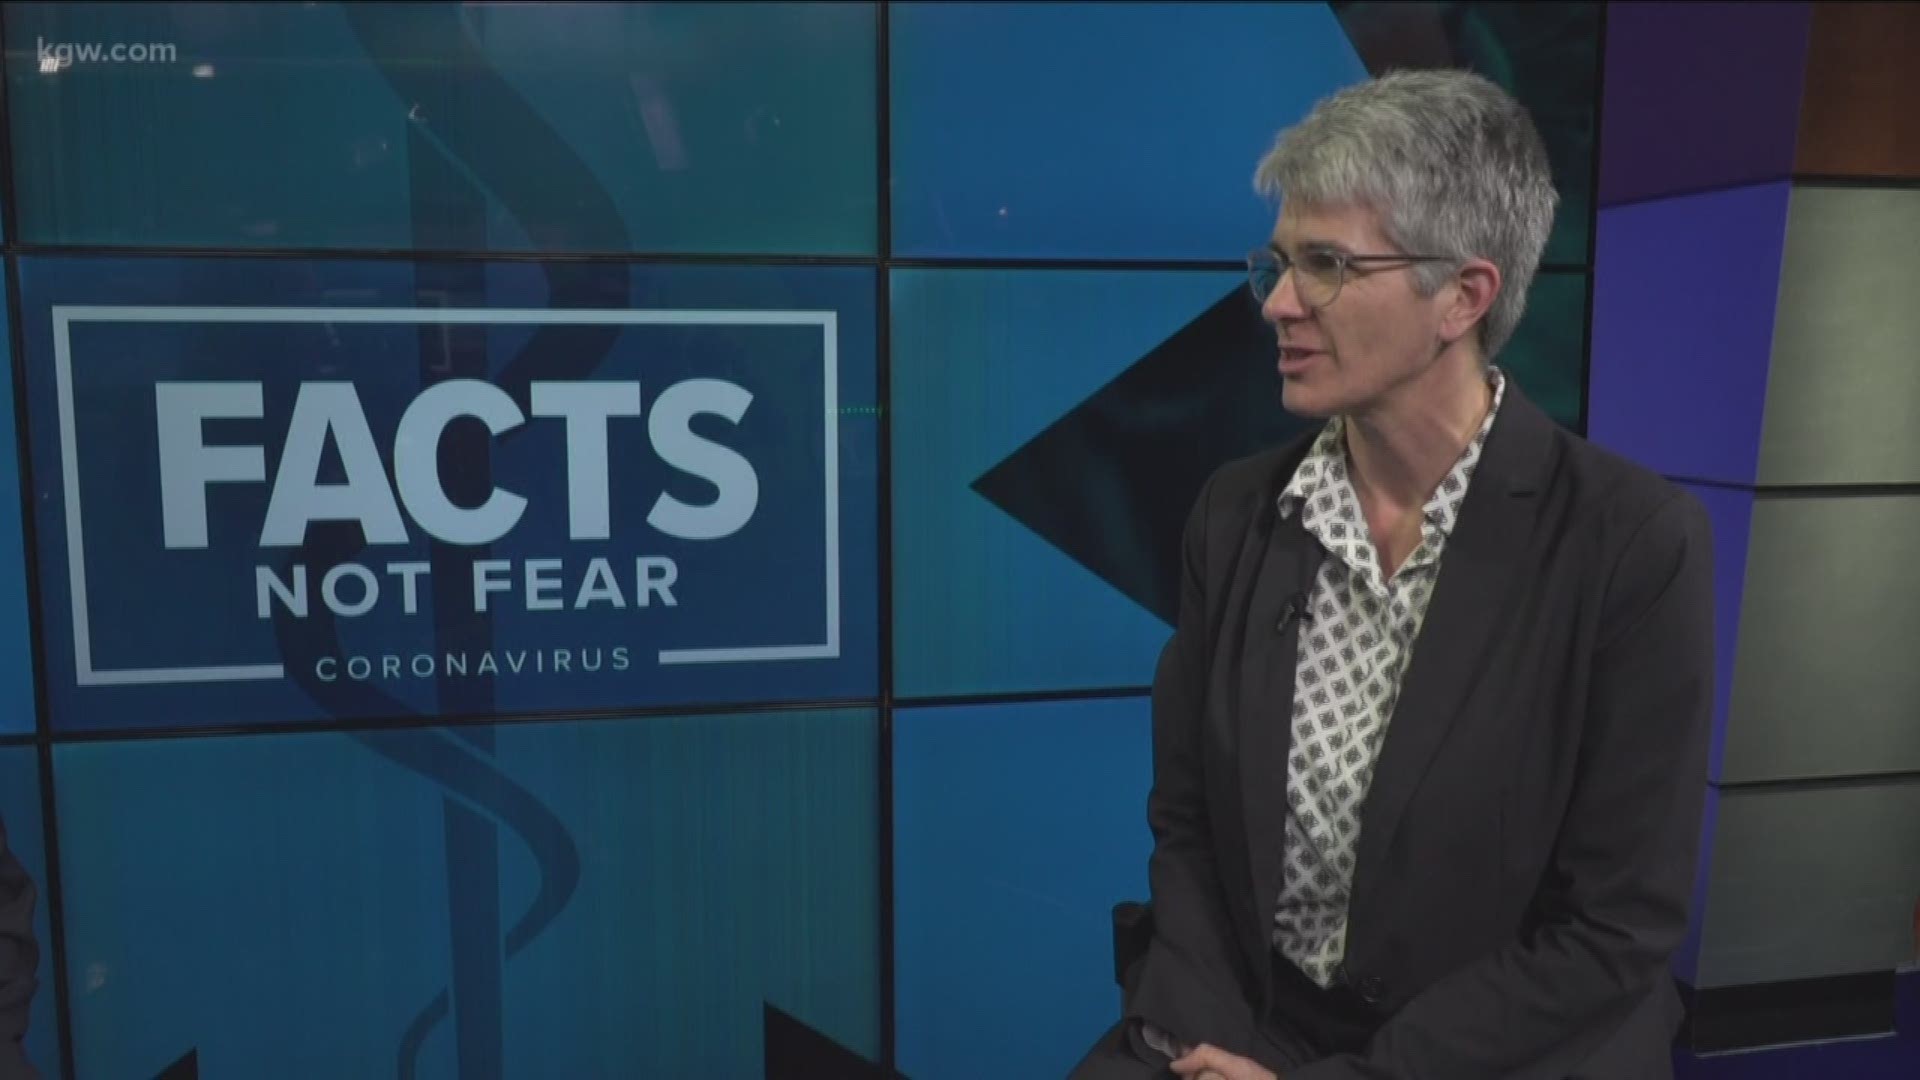 Kim Toevs from the Multnomah County Health Department discusses the coronavirus situation in Oregon and the US.